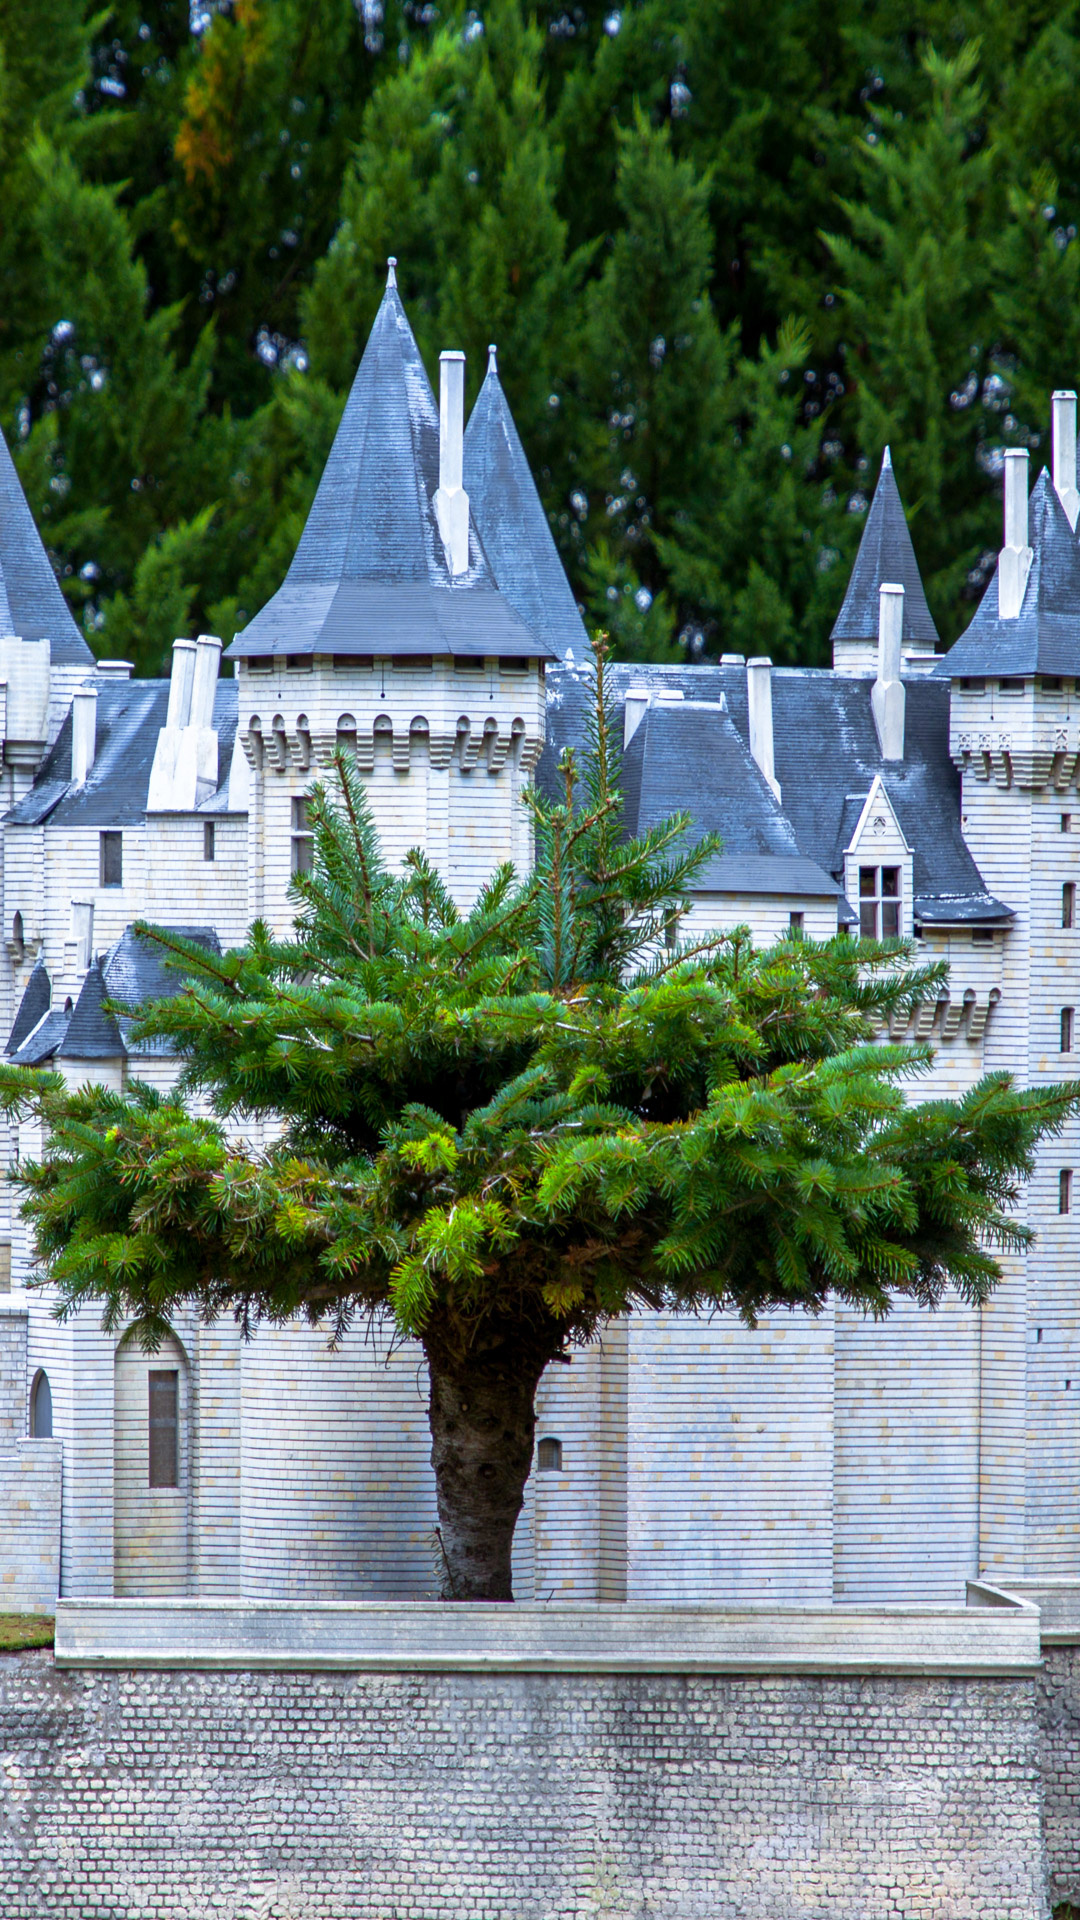 Get lost in the magic of our cool phone wallpapers, featuring a majestic tree standing tall beside a charming chateau in France, adding a touch of sophistication to your device.